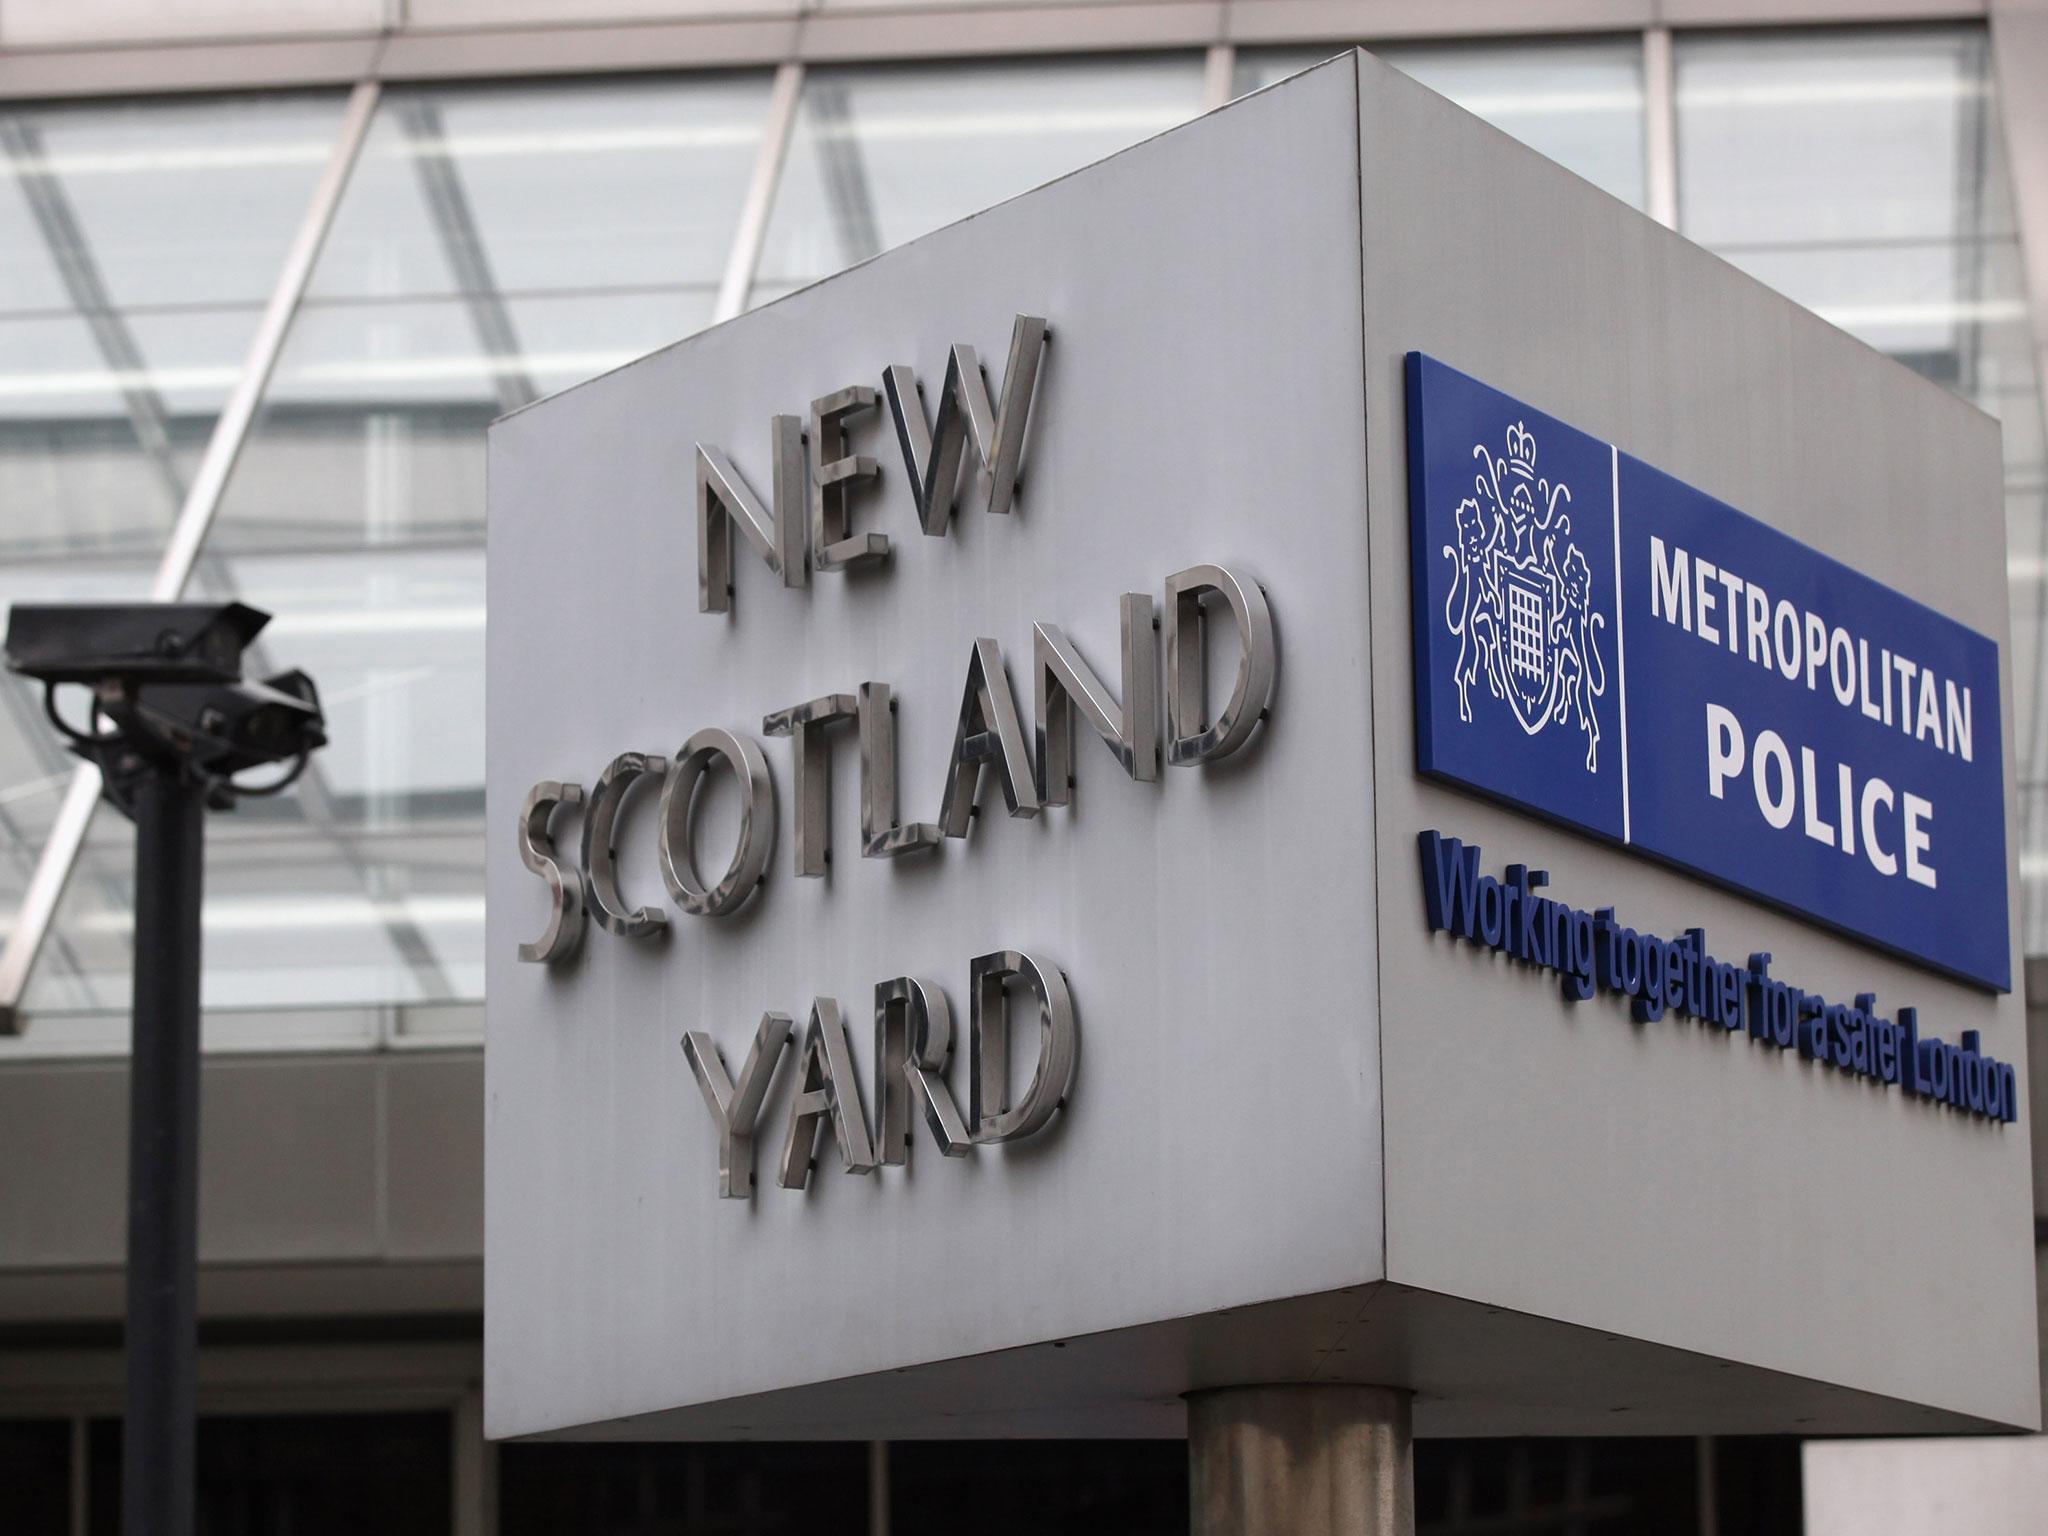 The Metropolitan Police said the rise could not be explained just by increased reporting and recording